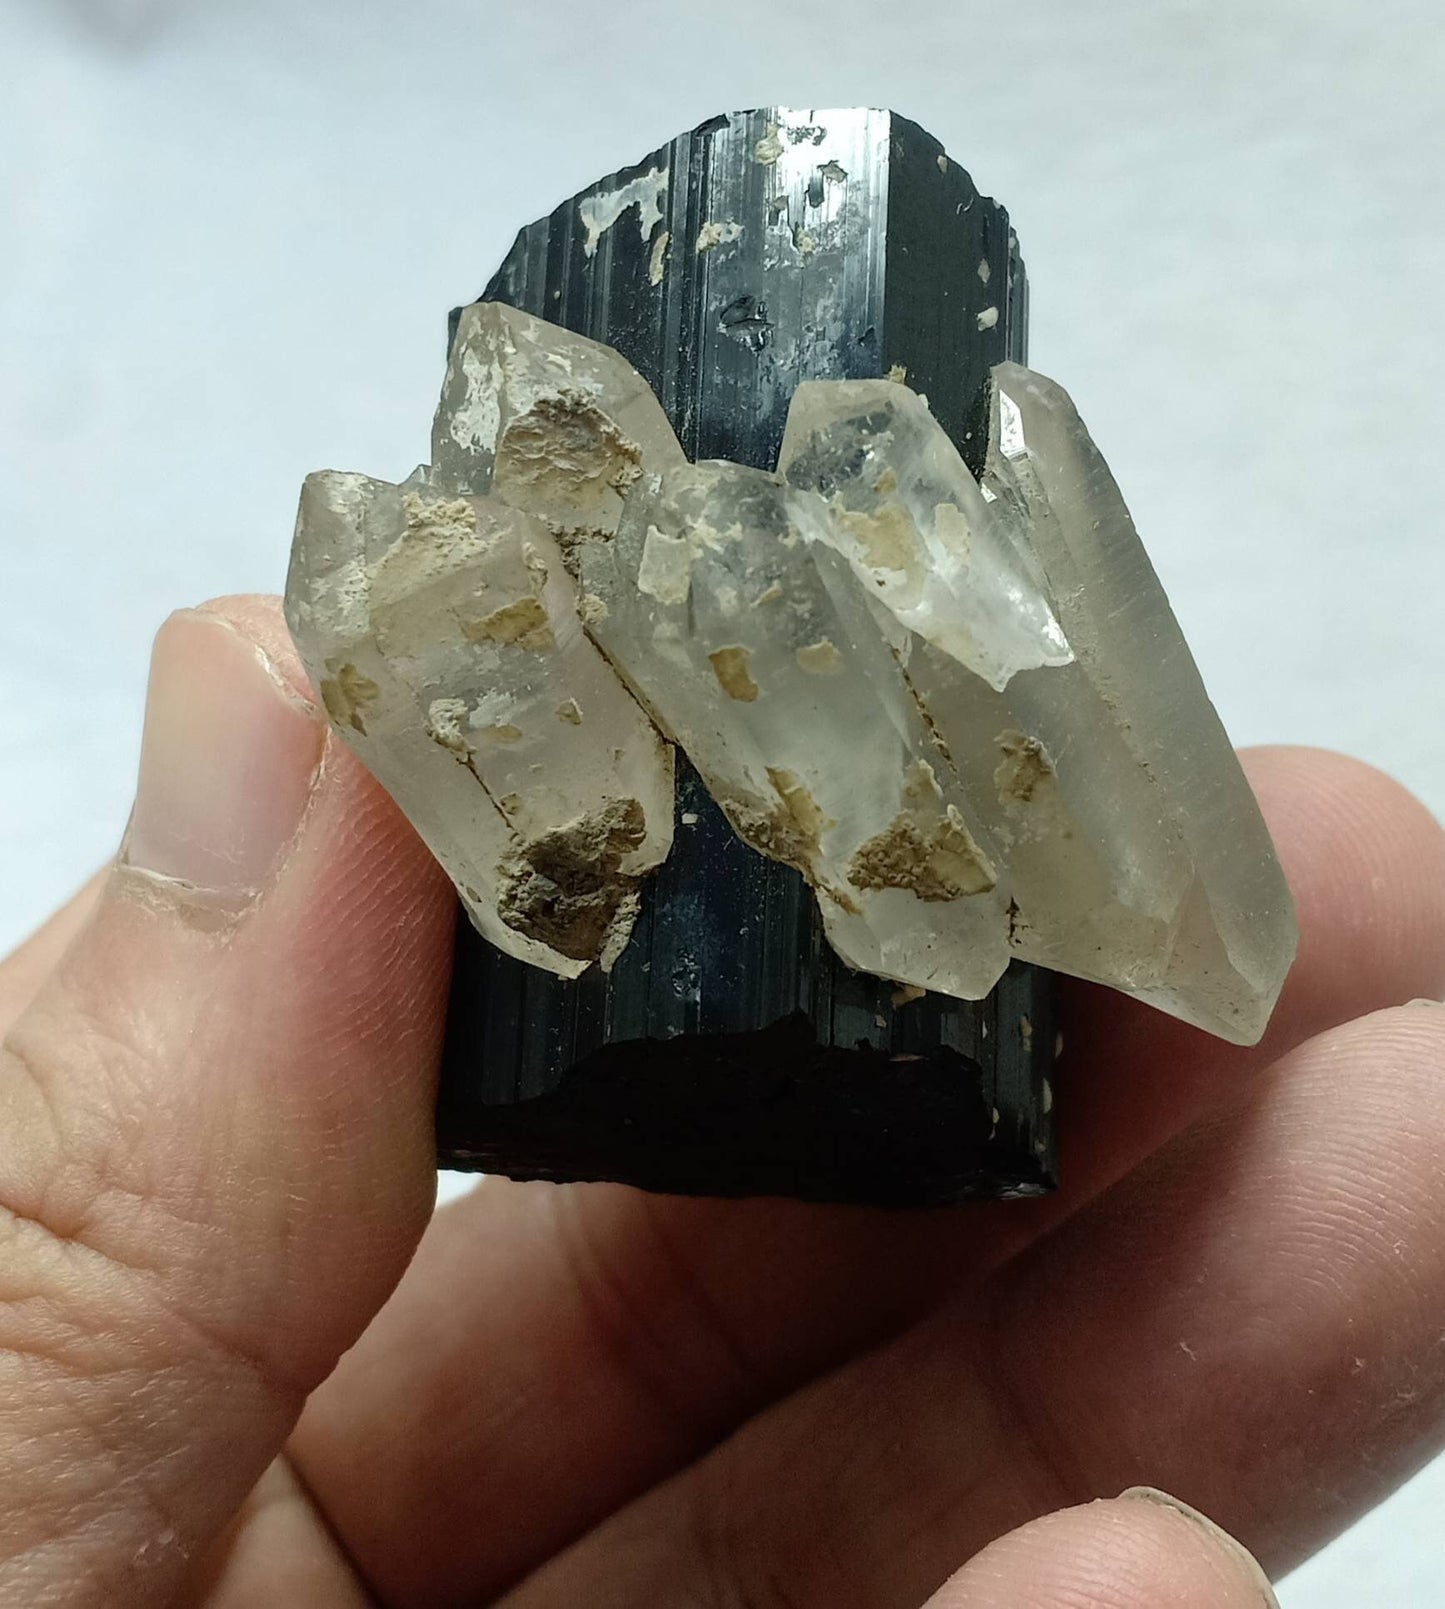 Black Tourmaline crystal nested in terminated quartz crystals 123g